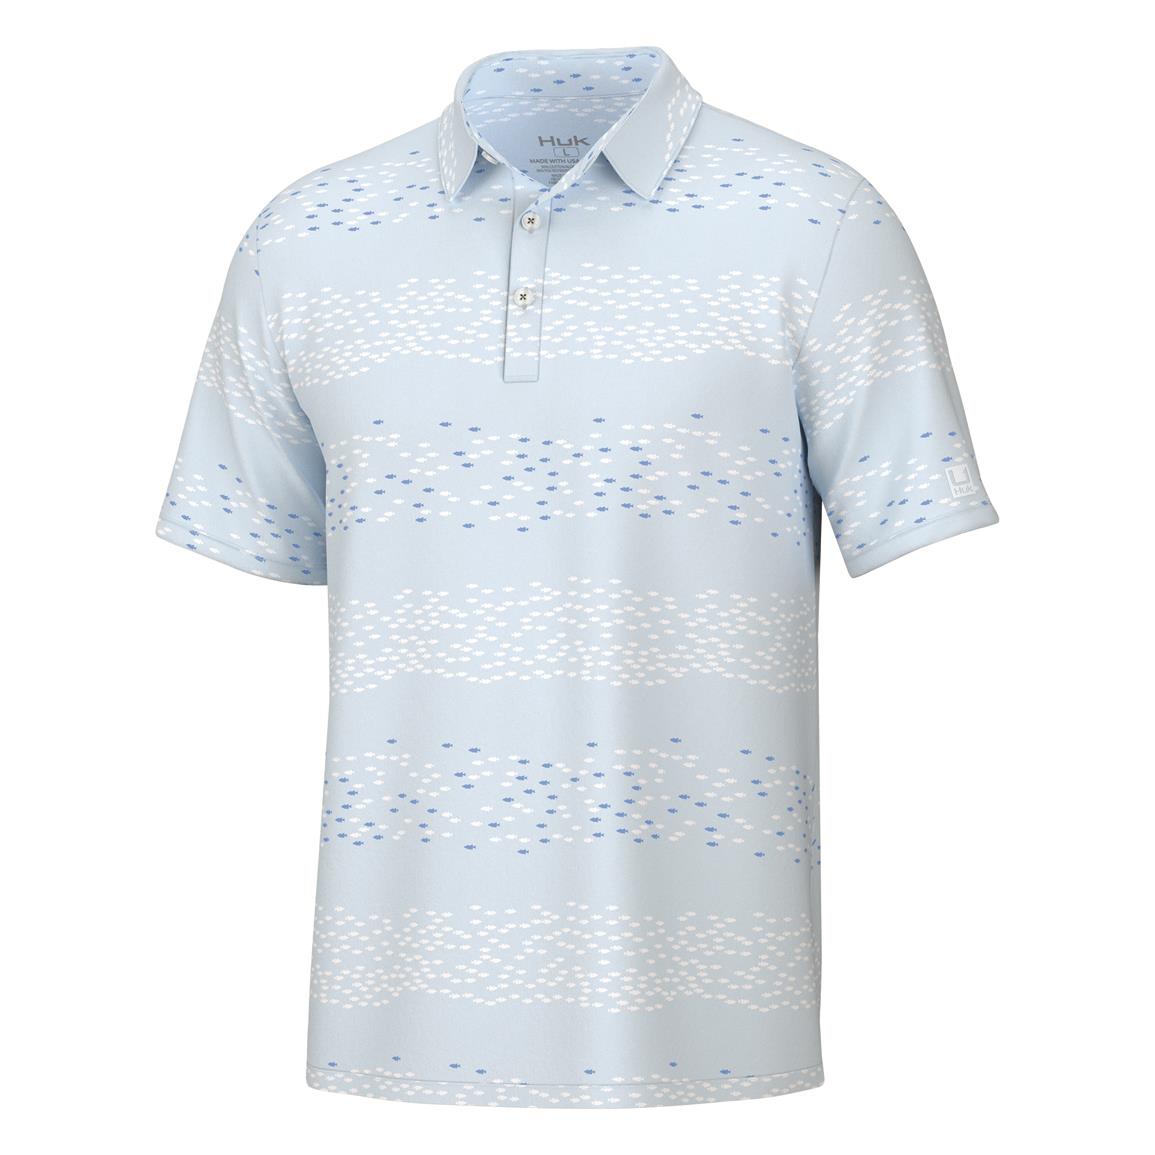 Huk Men's Pursuit Up Stream Printed Polo, Ice Water